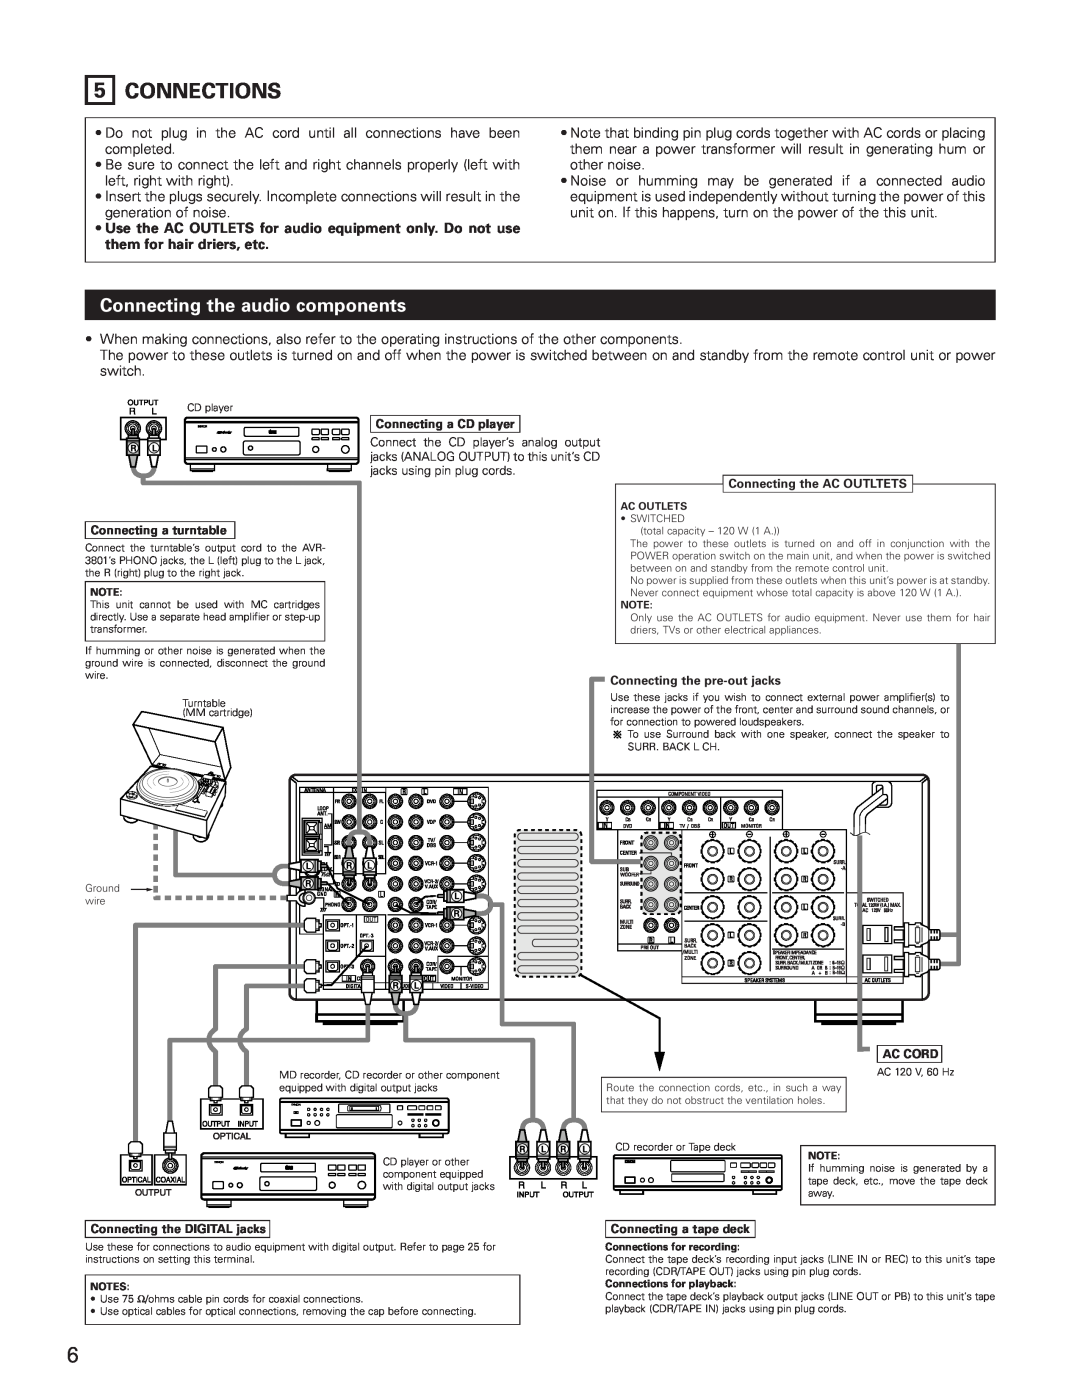 Denon AVR-3801 manual Connections, Connecting the audio components 